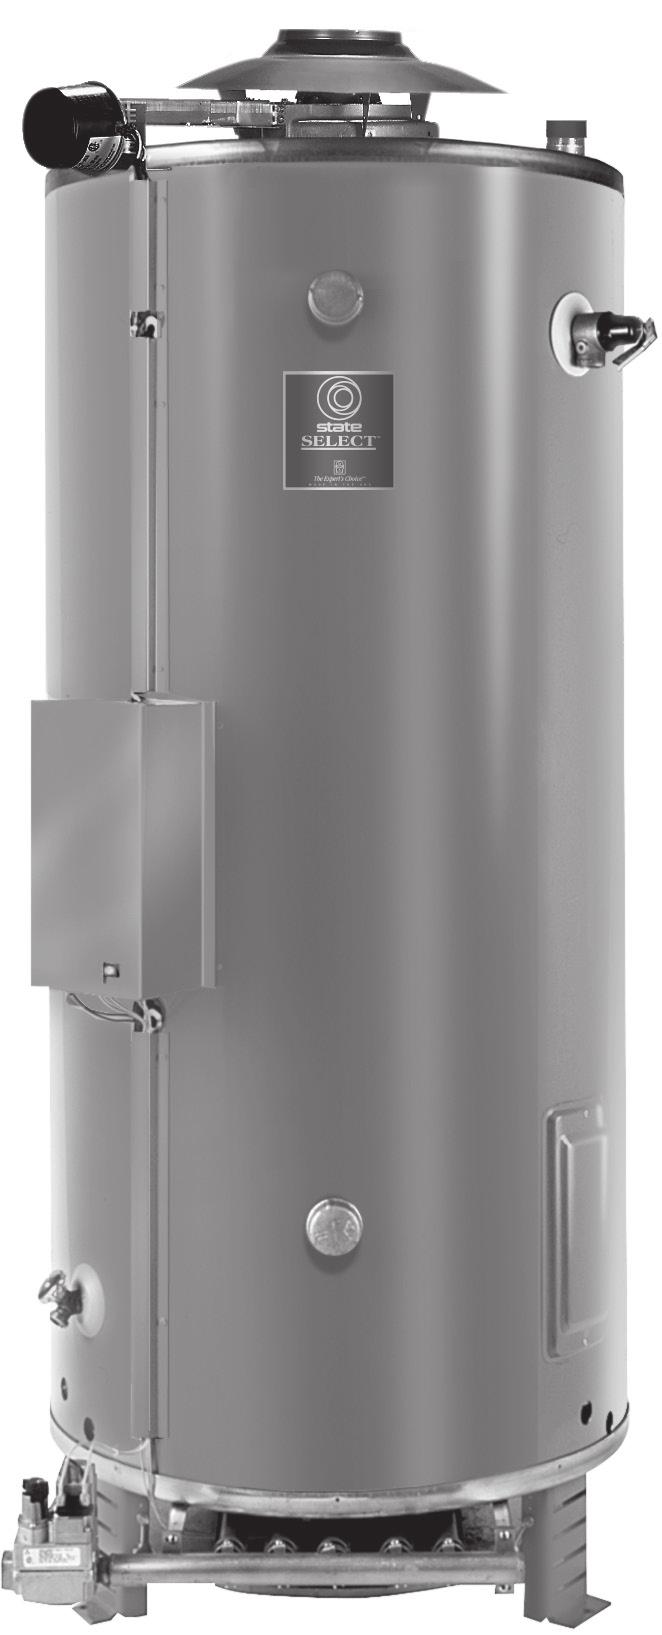 Instruction Manual commercial gas water heaters 500 Tennessee Waltz Parkway Ashland City, TN 37015 MODELS SBD71120(N,P)E thru SBD100390(N,P)E SERIES 118/119 INSTALLATION - OPERATION - SERVICE -